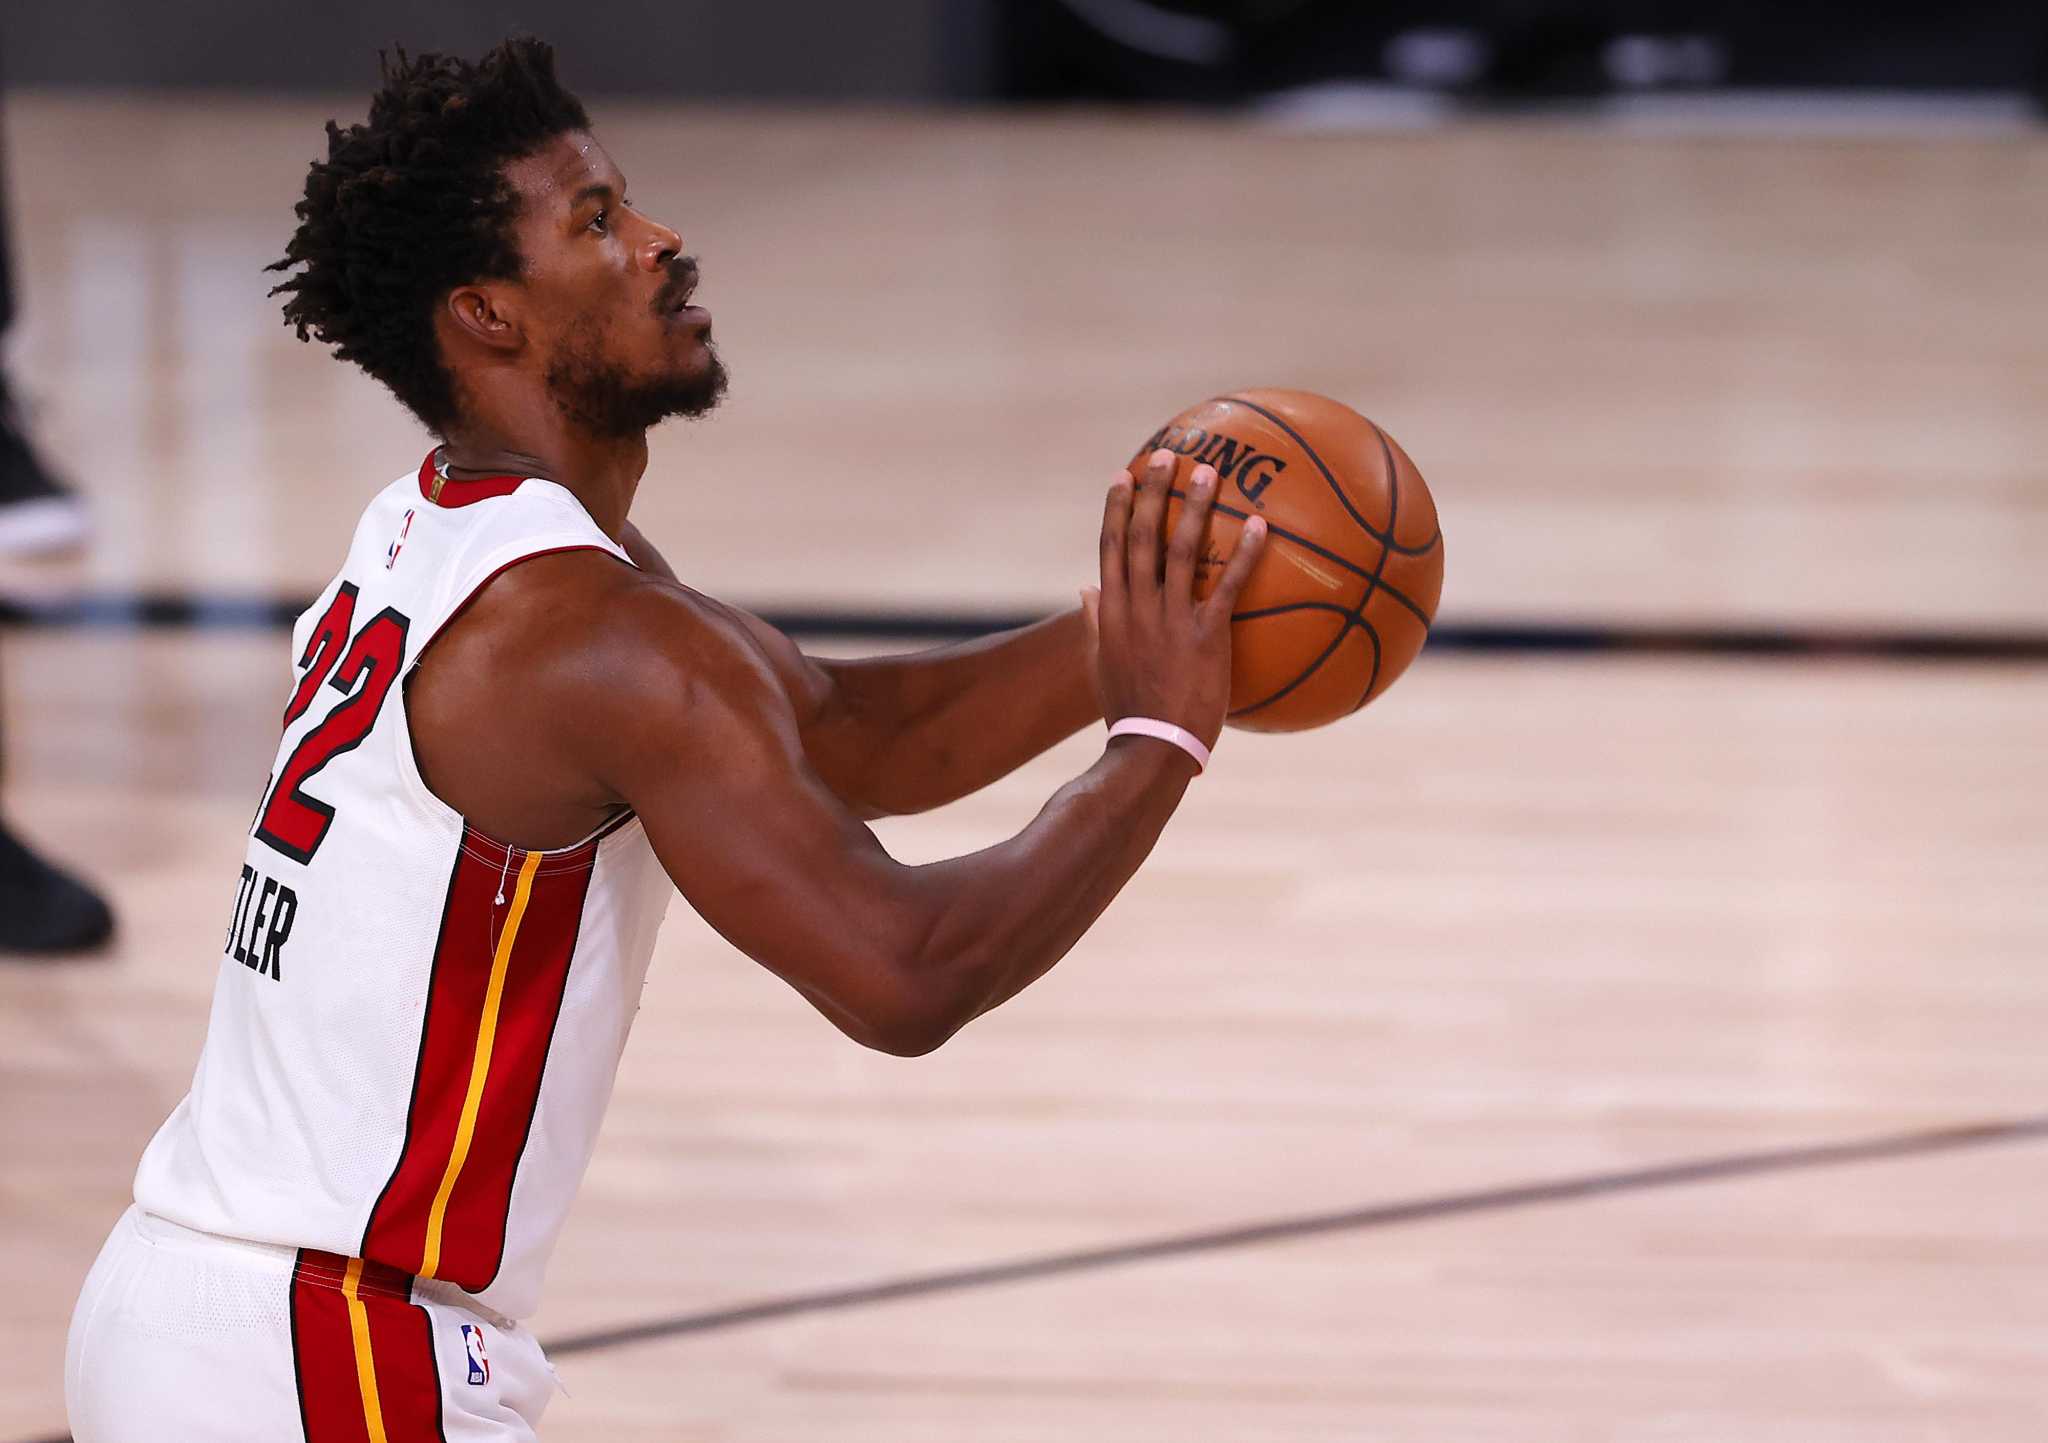 How The Rockets Went All In On Jimmy Butler But Missed Houstonchronicle Com https www houstonchronicle com texas sports nation rockets article how the rockets went all in on jimmy butler but 15603283 php